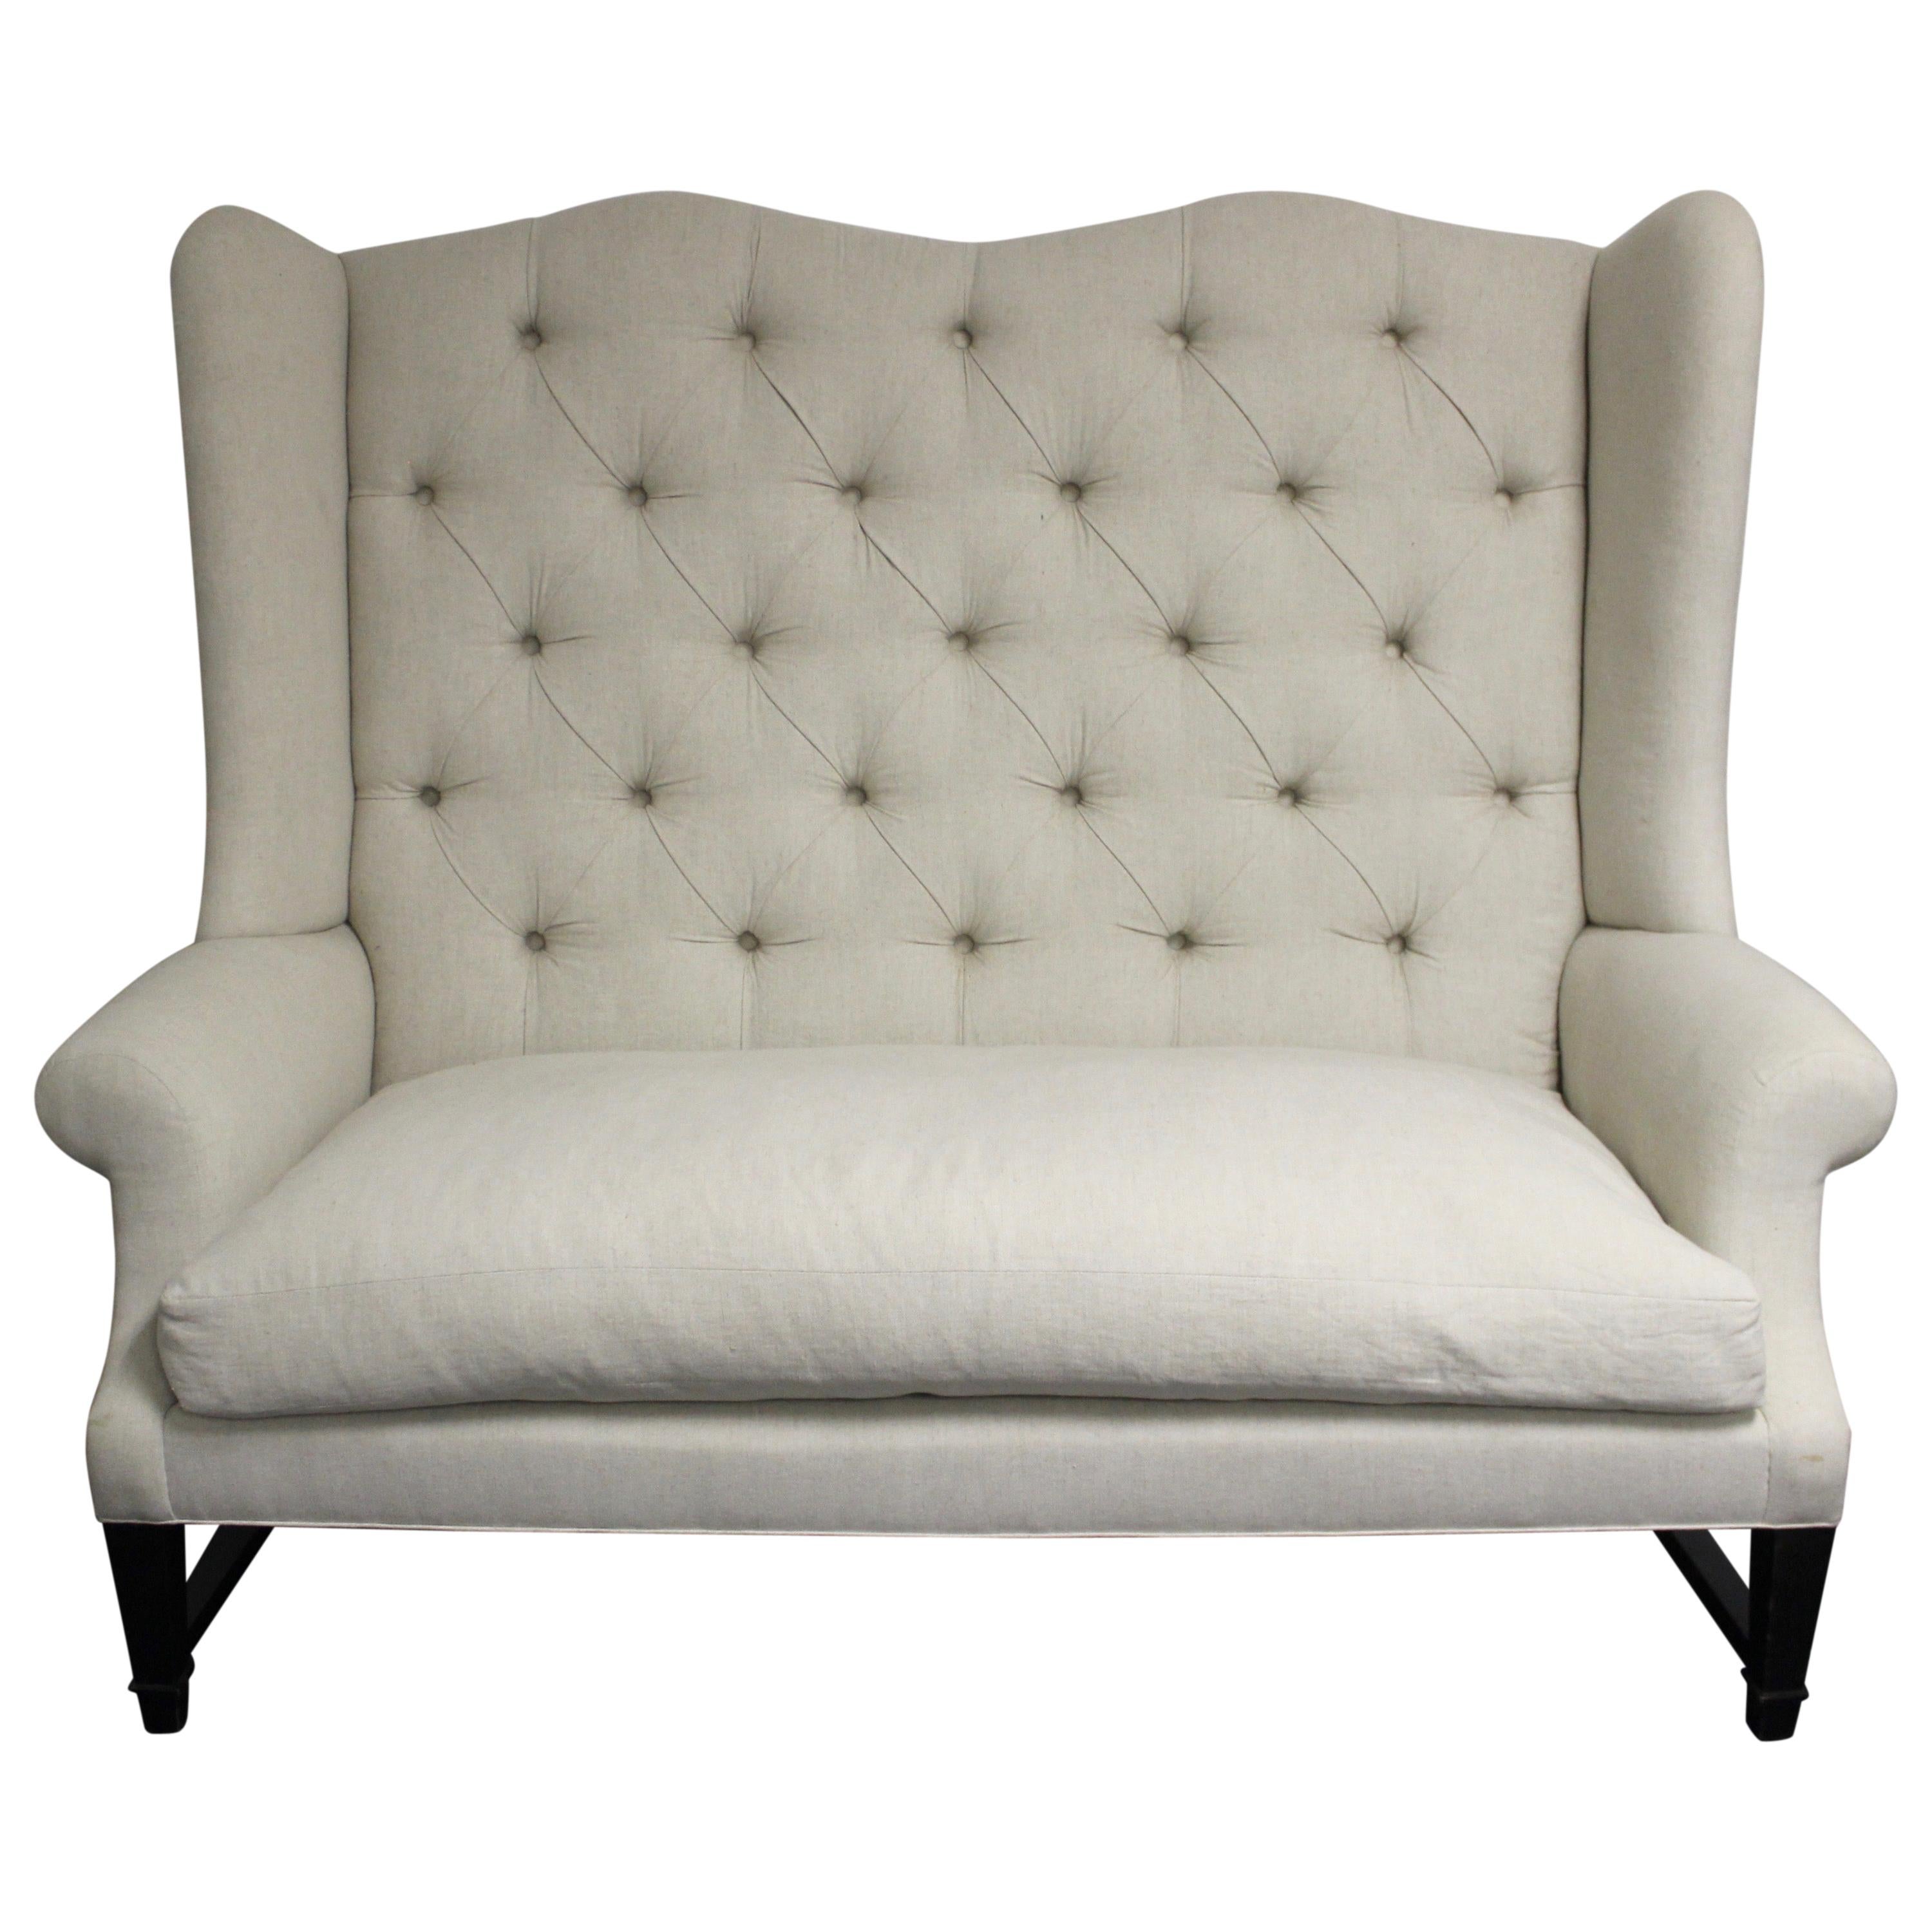 Onmogelijk Muildier Catastrofaal Tufted Wing Back Sofa For Sale at 1stDibs | wing back couch, winged sofa,  high back tufted sofa